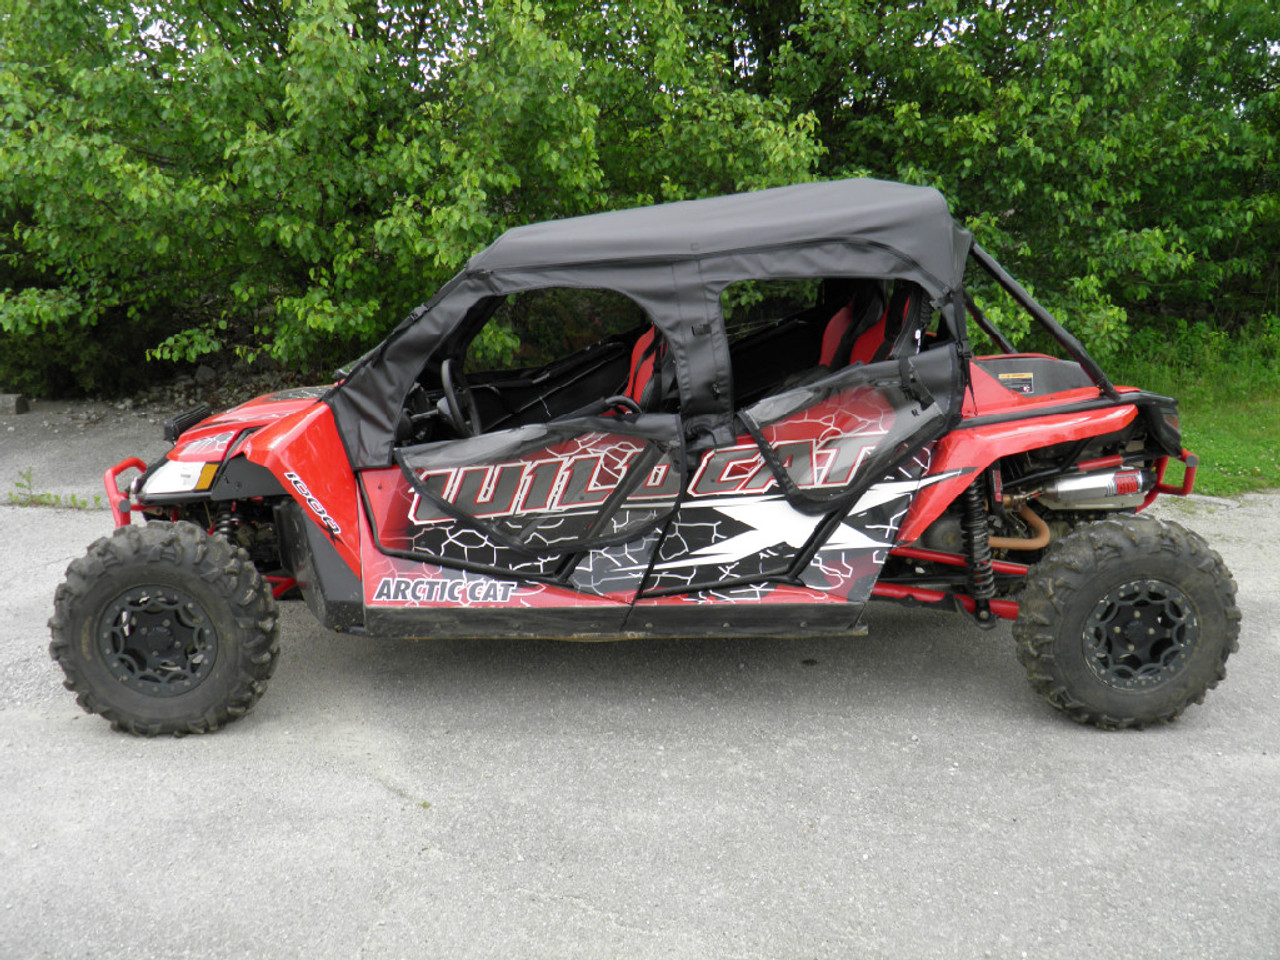 3 Star, side x side, arctic cat, wildcat 4, side view